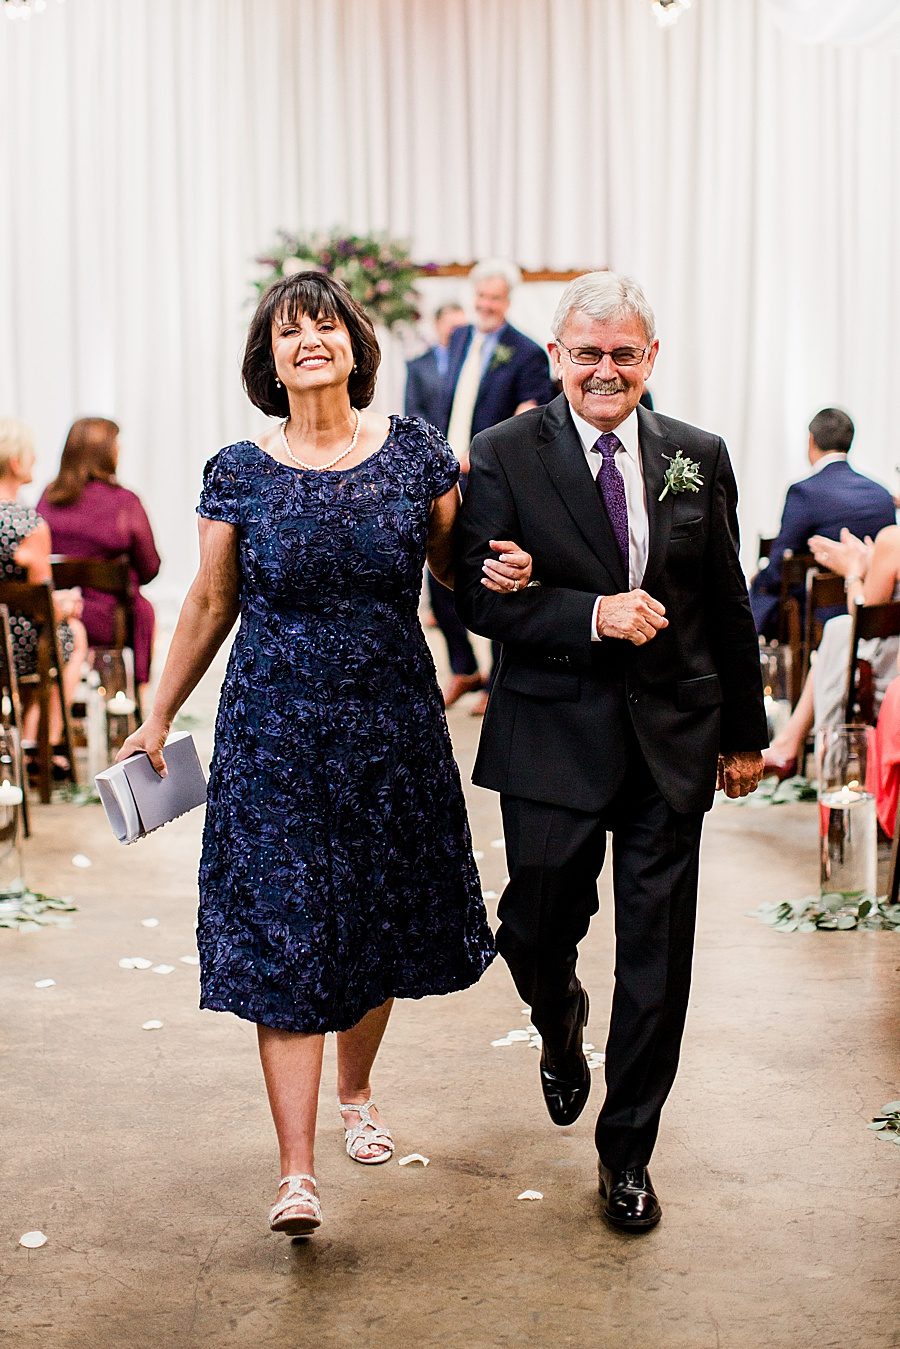 Parents of the bride at this Wedding at The Standard by Knoxville Wedding Photographer, Amanda May Photos.